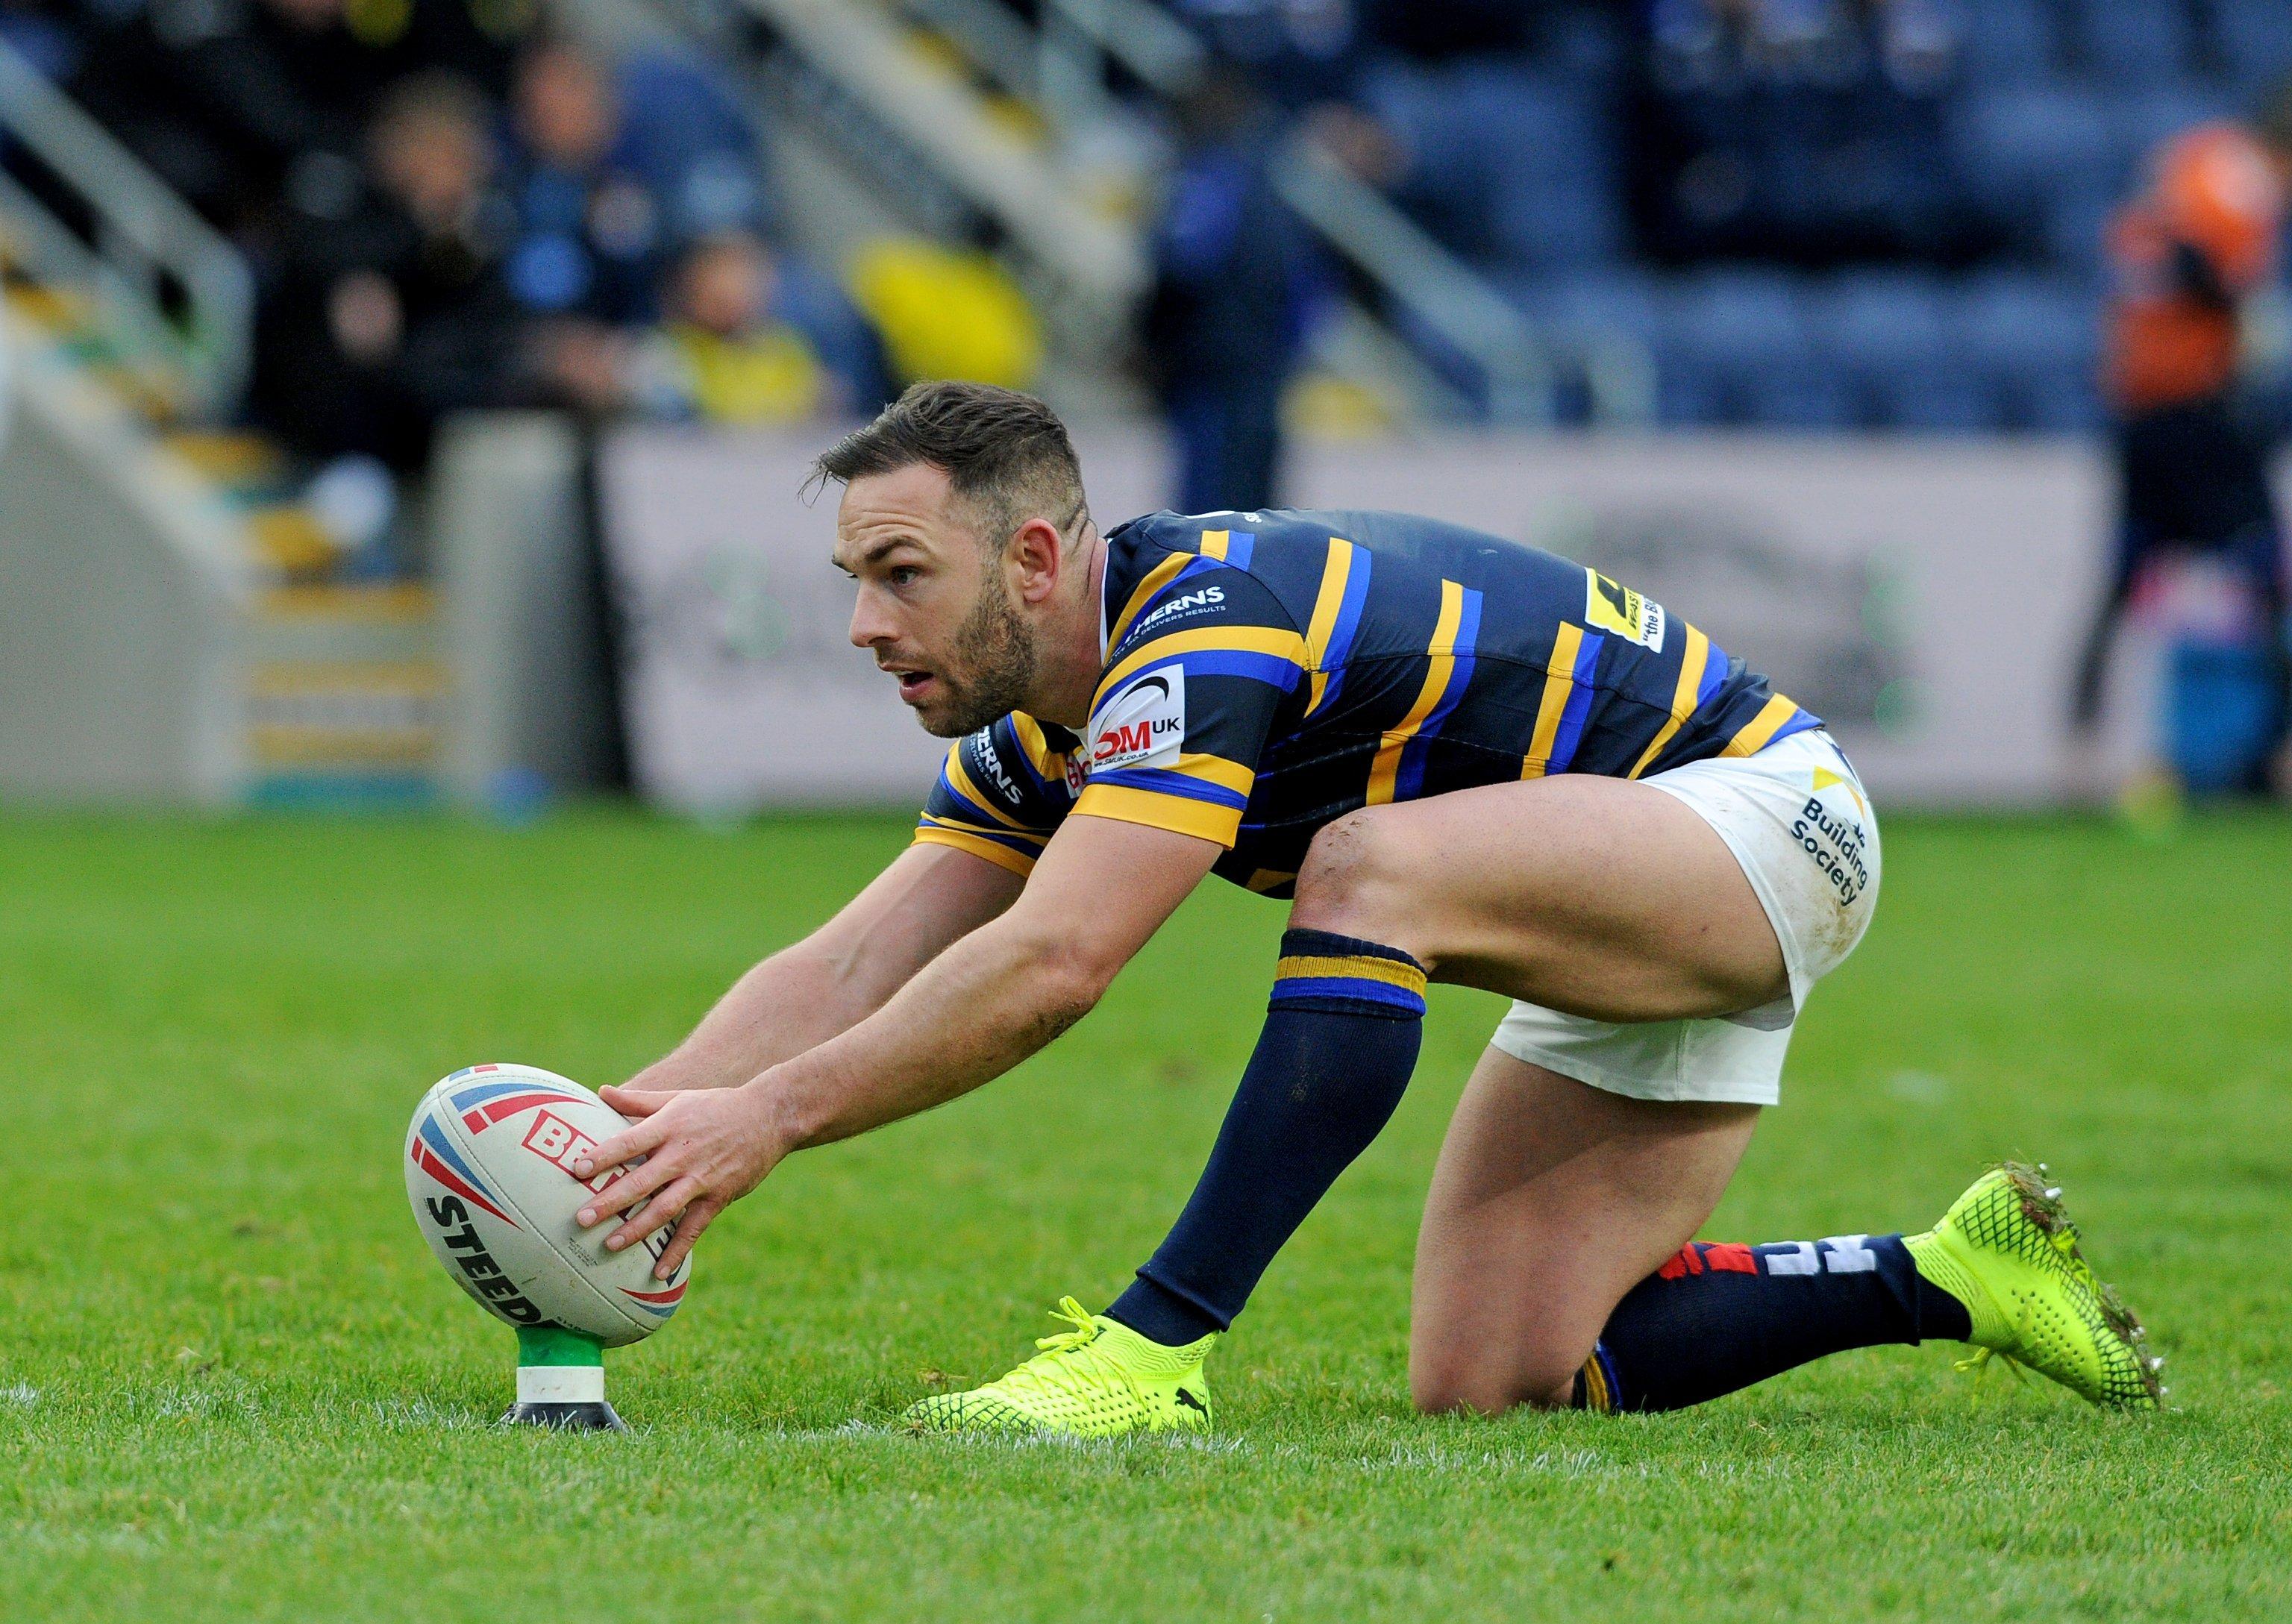 Leeds Rhinos' Luke Gale didn't feature in Sunday's testimonial but should be cleared to play against Wigan. PIC: Steve Riding